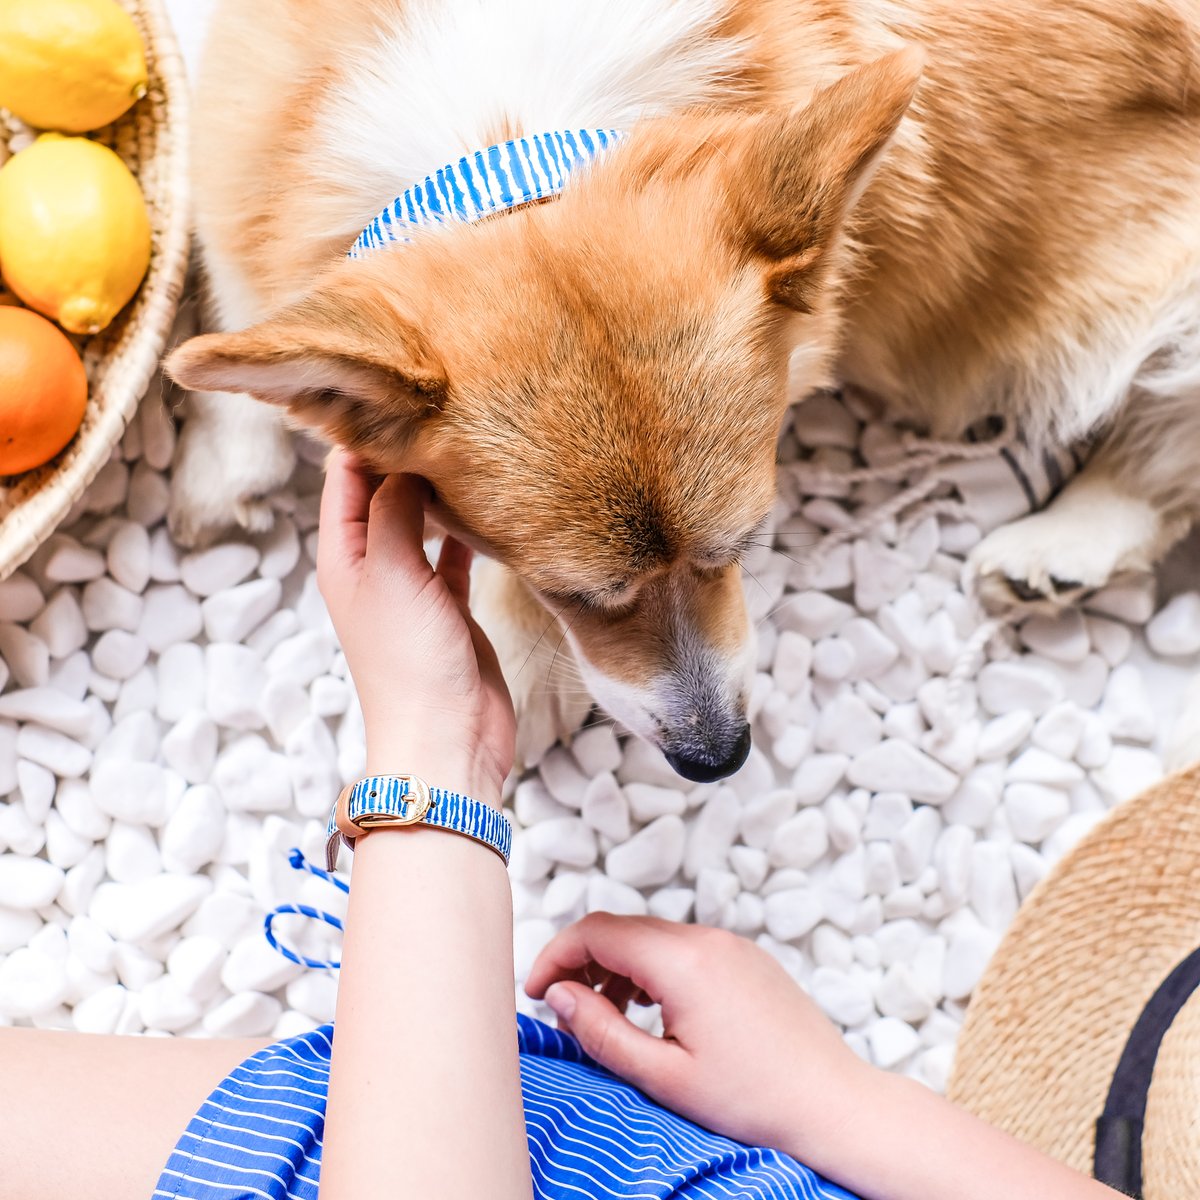 #wontlookwednesday in my new FriendshipCollar Water Color Baby! Are you excited to go to the beach?

#friendshipcollar #petcare #love #matching #besties #fashion #collar #woof #doglover #petstagram #mansbestfriend #dogfashion #dogs #dogaccessories #dogmodel #doglife #dogoftheday